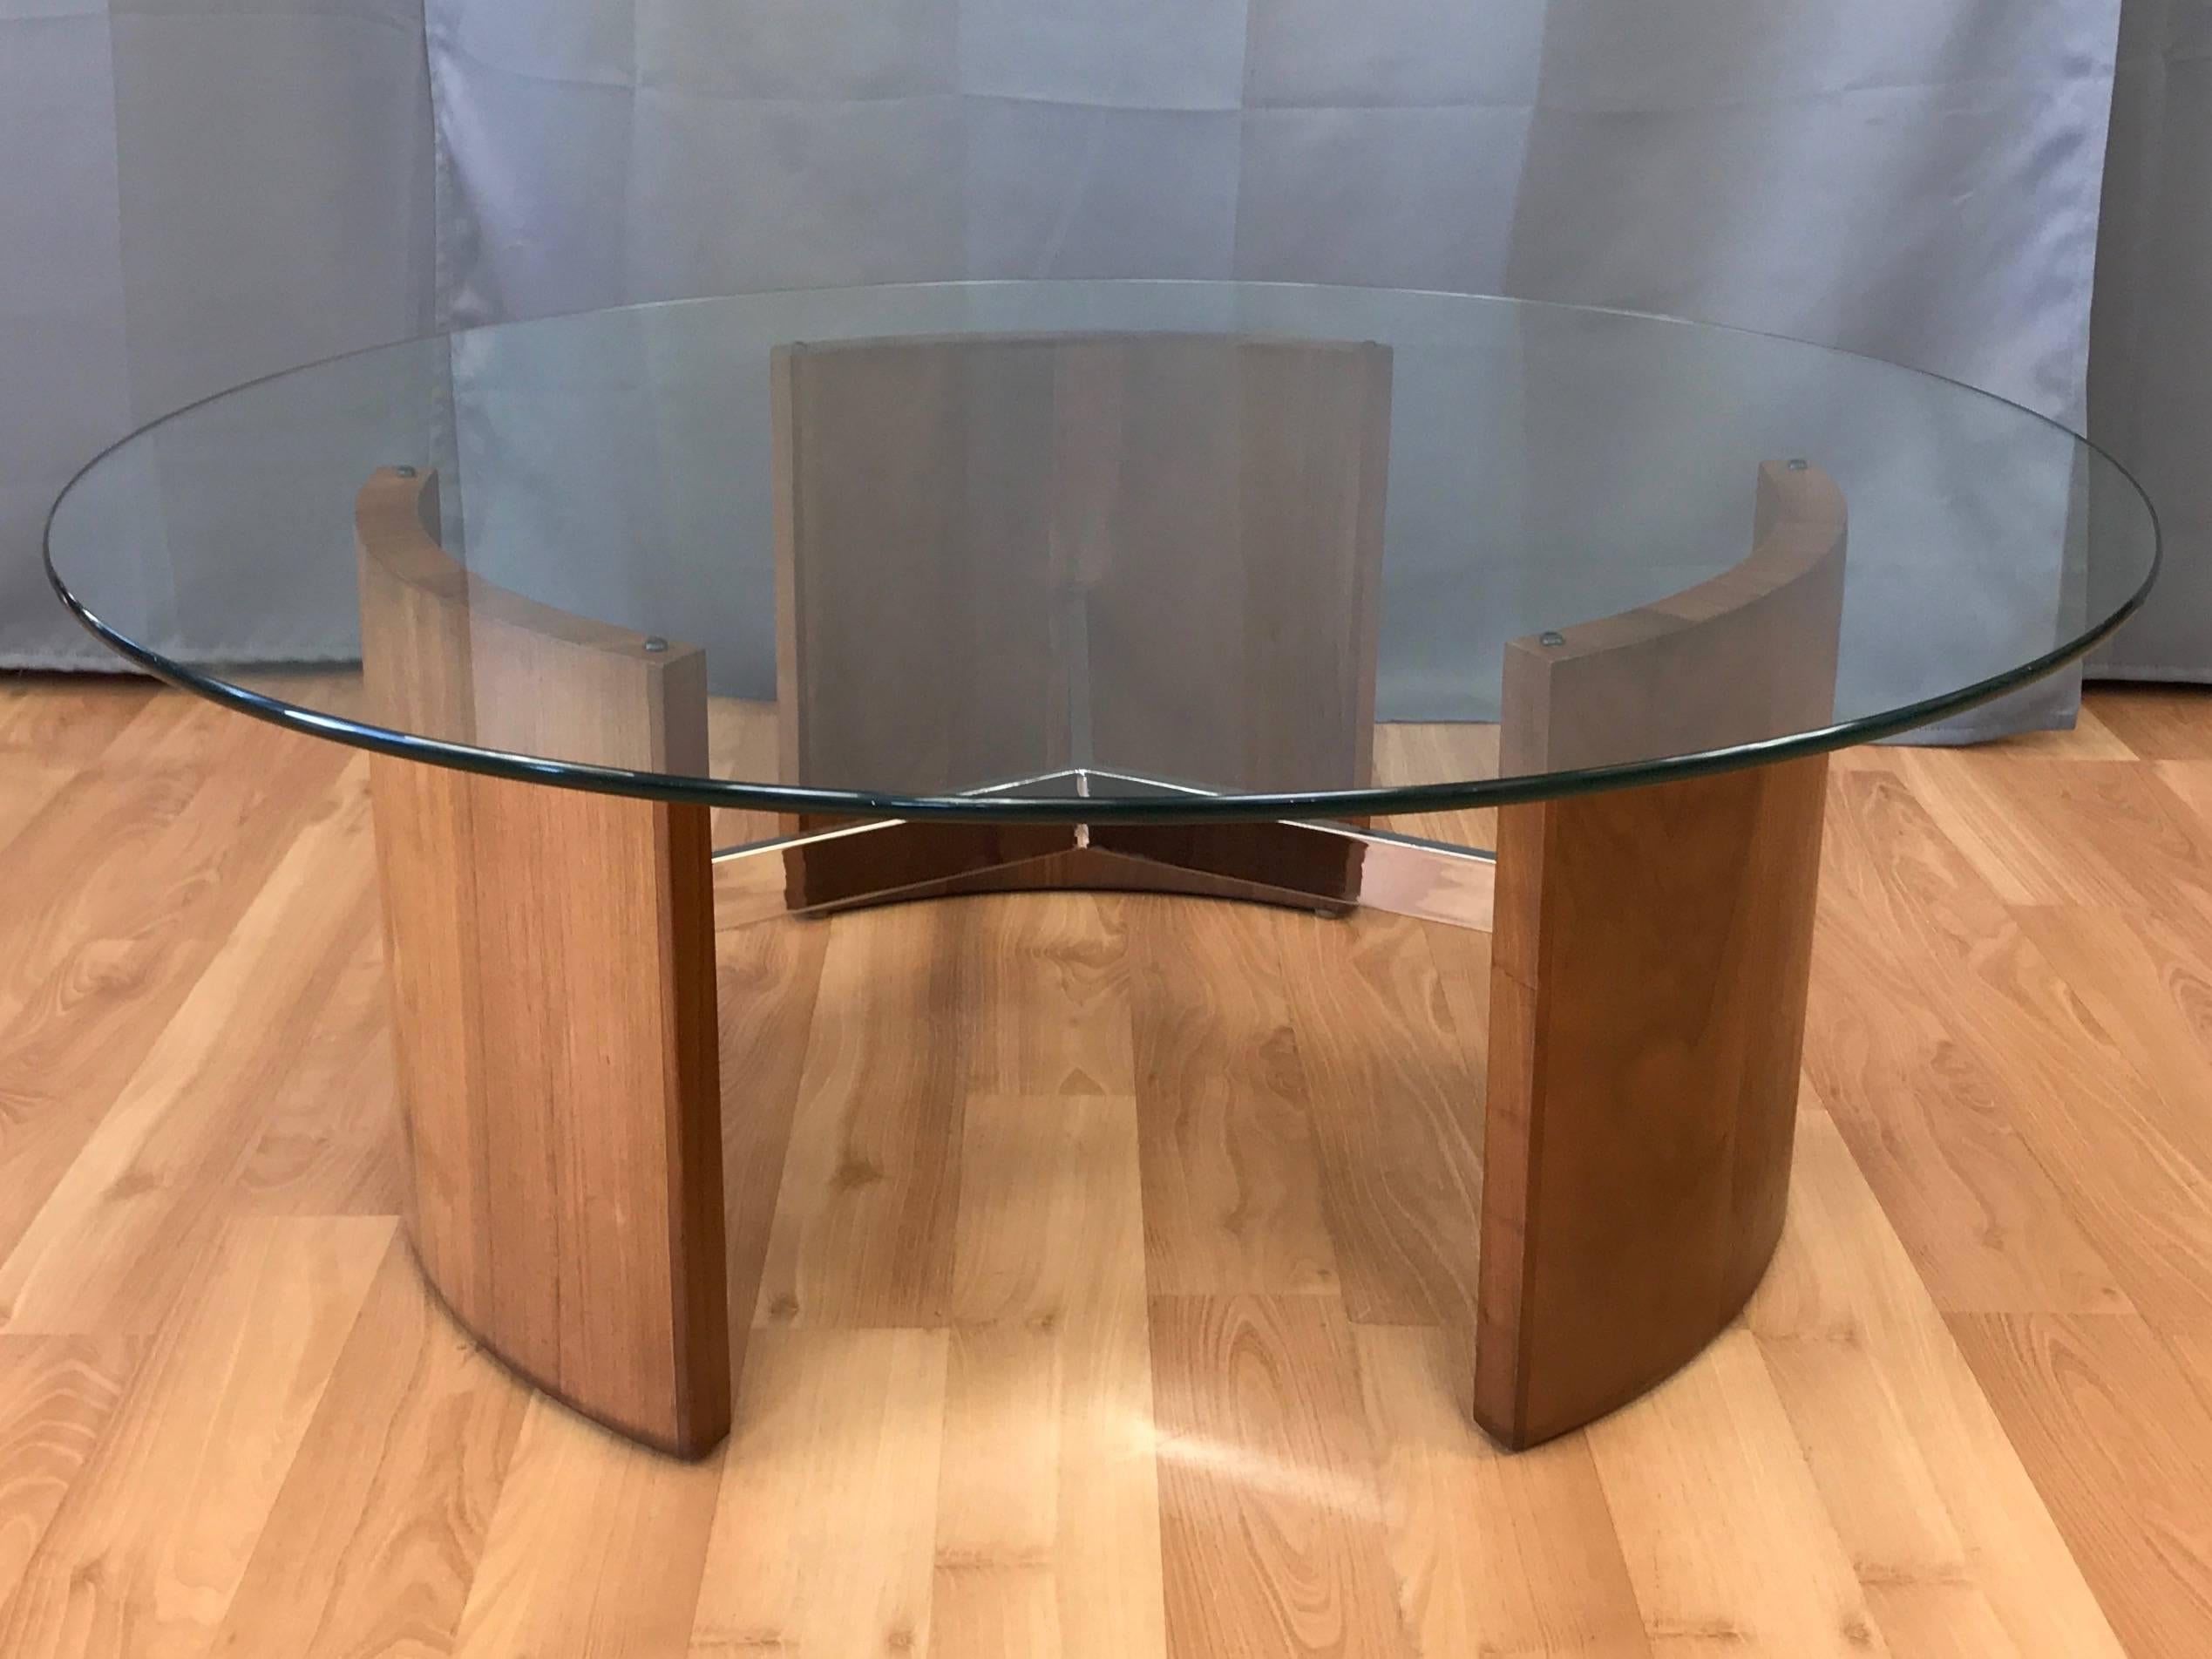 A striking Mid-Century Modern walnut and polished metal Radius coffee table by Vladimir Kagan.

Architecturally sculptural design comprised of three thick, curved walnut slabs joined by a polished nickel-plated steel three-spoke center. Geometry of